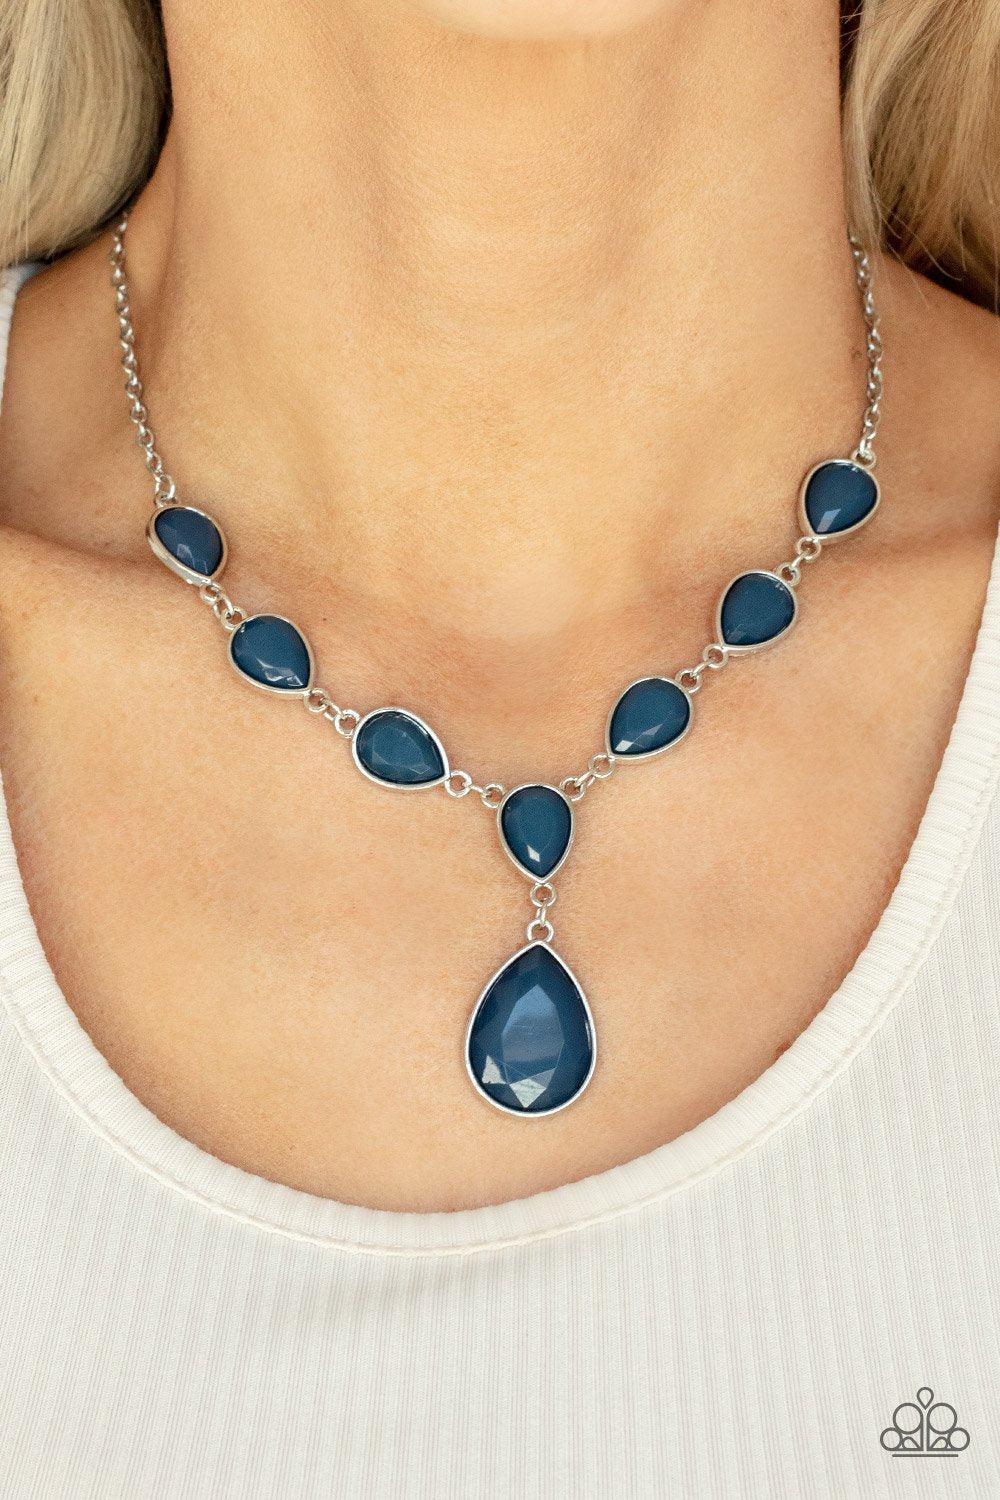 Party Paradise Blue Necklace - Paparazzi Accessories- model - CarasShop.com - $5 Jewelry by Cara Jewels